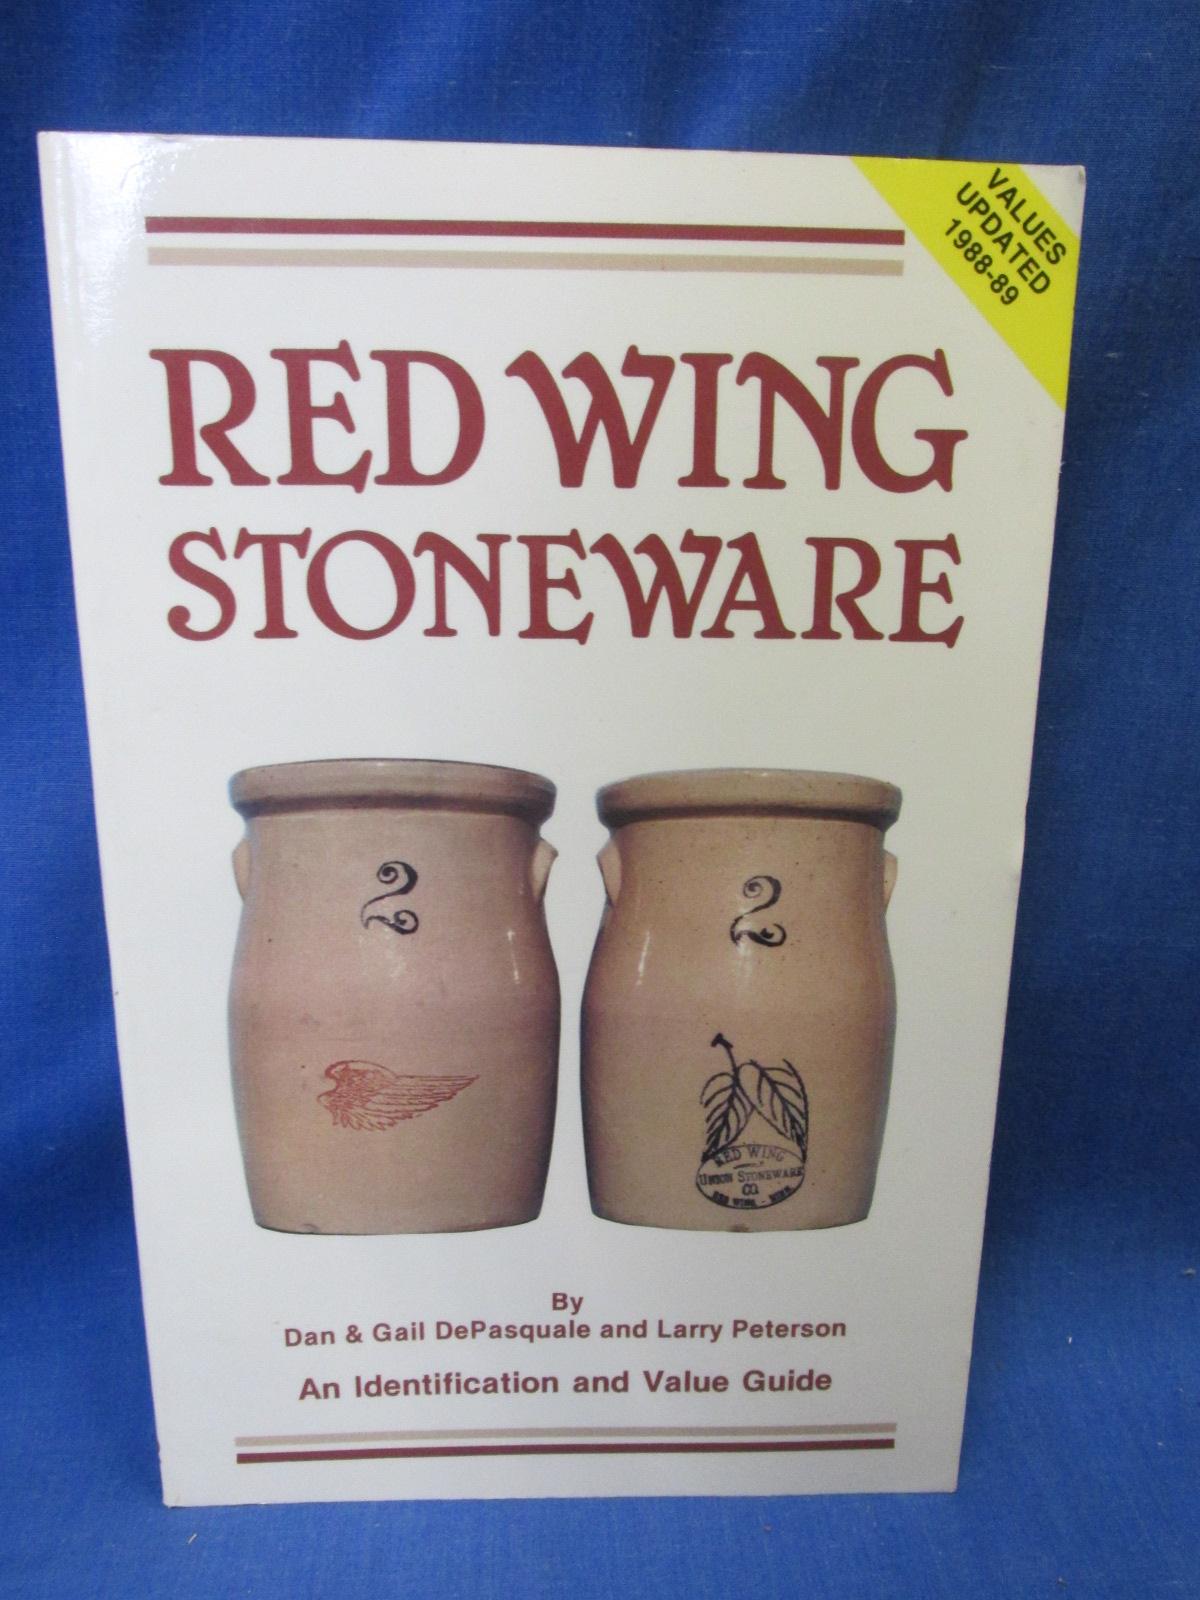 2 Books On Red Wing: 1988-89 Value Guide  Red Wing Stone Ware & “Red Wing